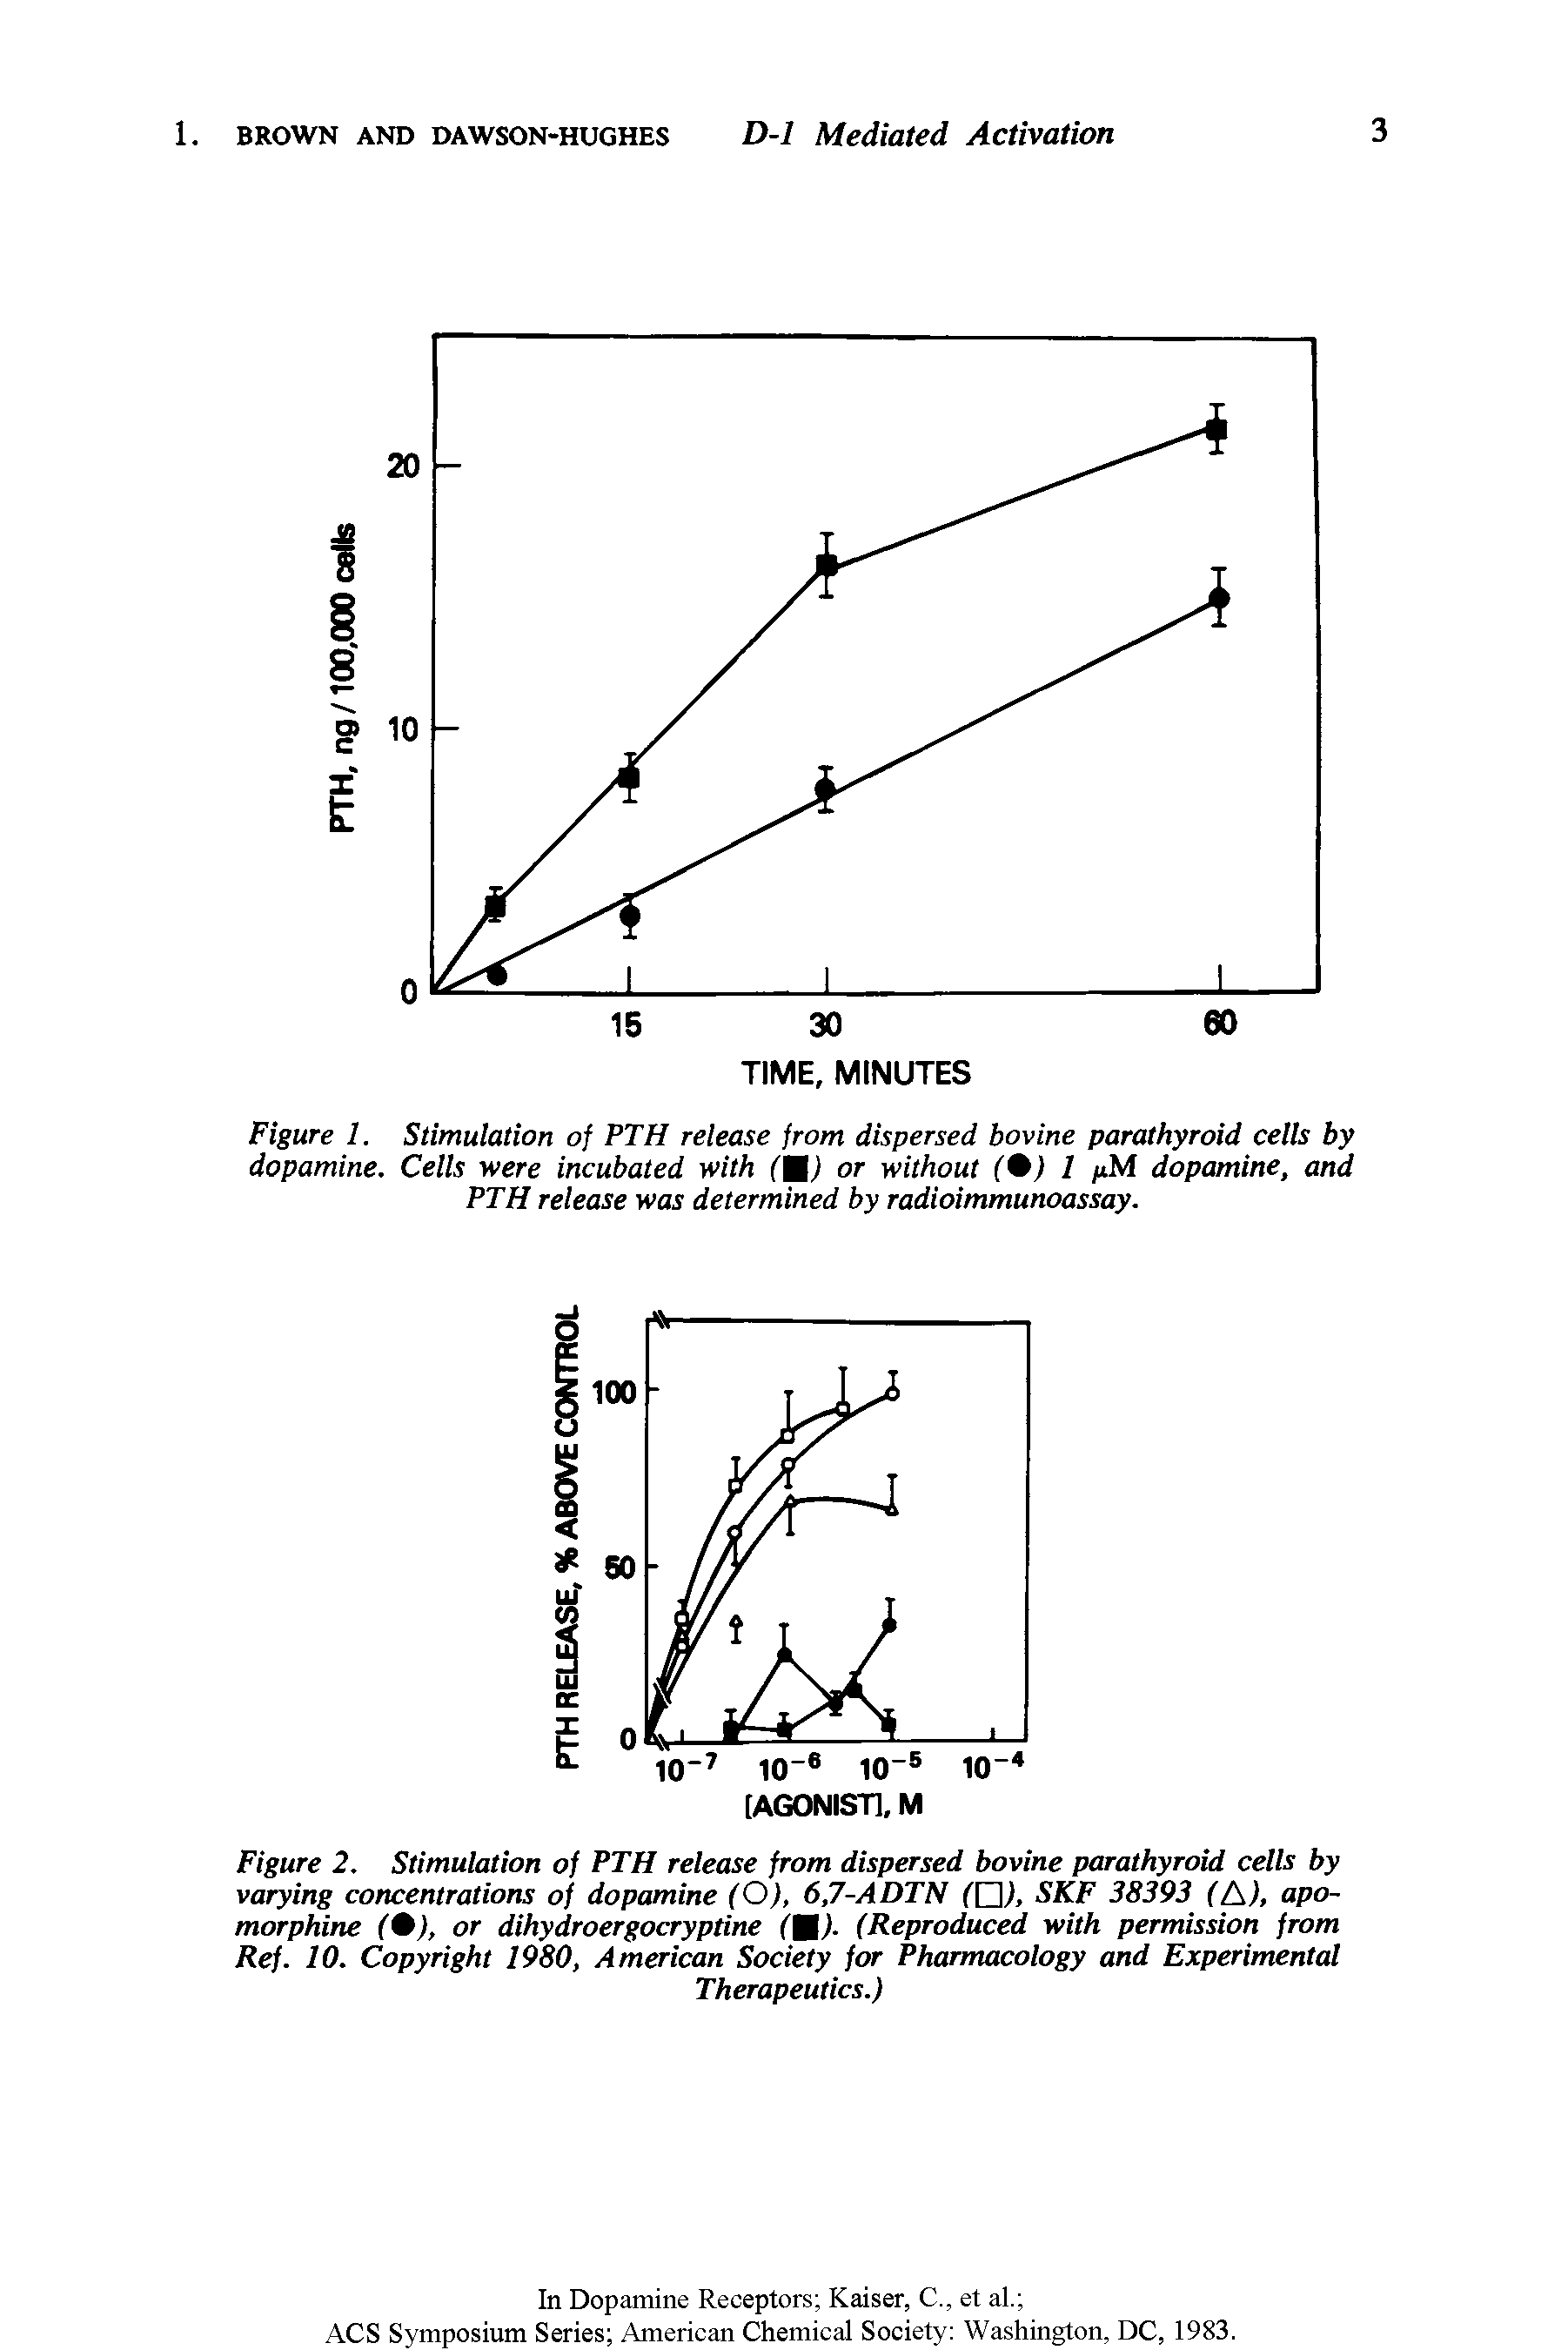 Figure 1. Stimulation of PTH release from dispersed bovine parathyroid cells by dopamine. Cells were incubated with (M) or without ( j 1 /tM dopamine, and PTH release was determined by radioimmunoassay.